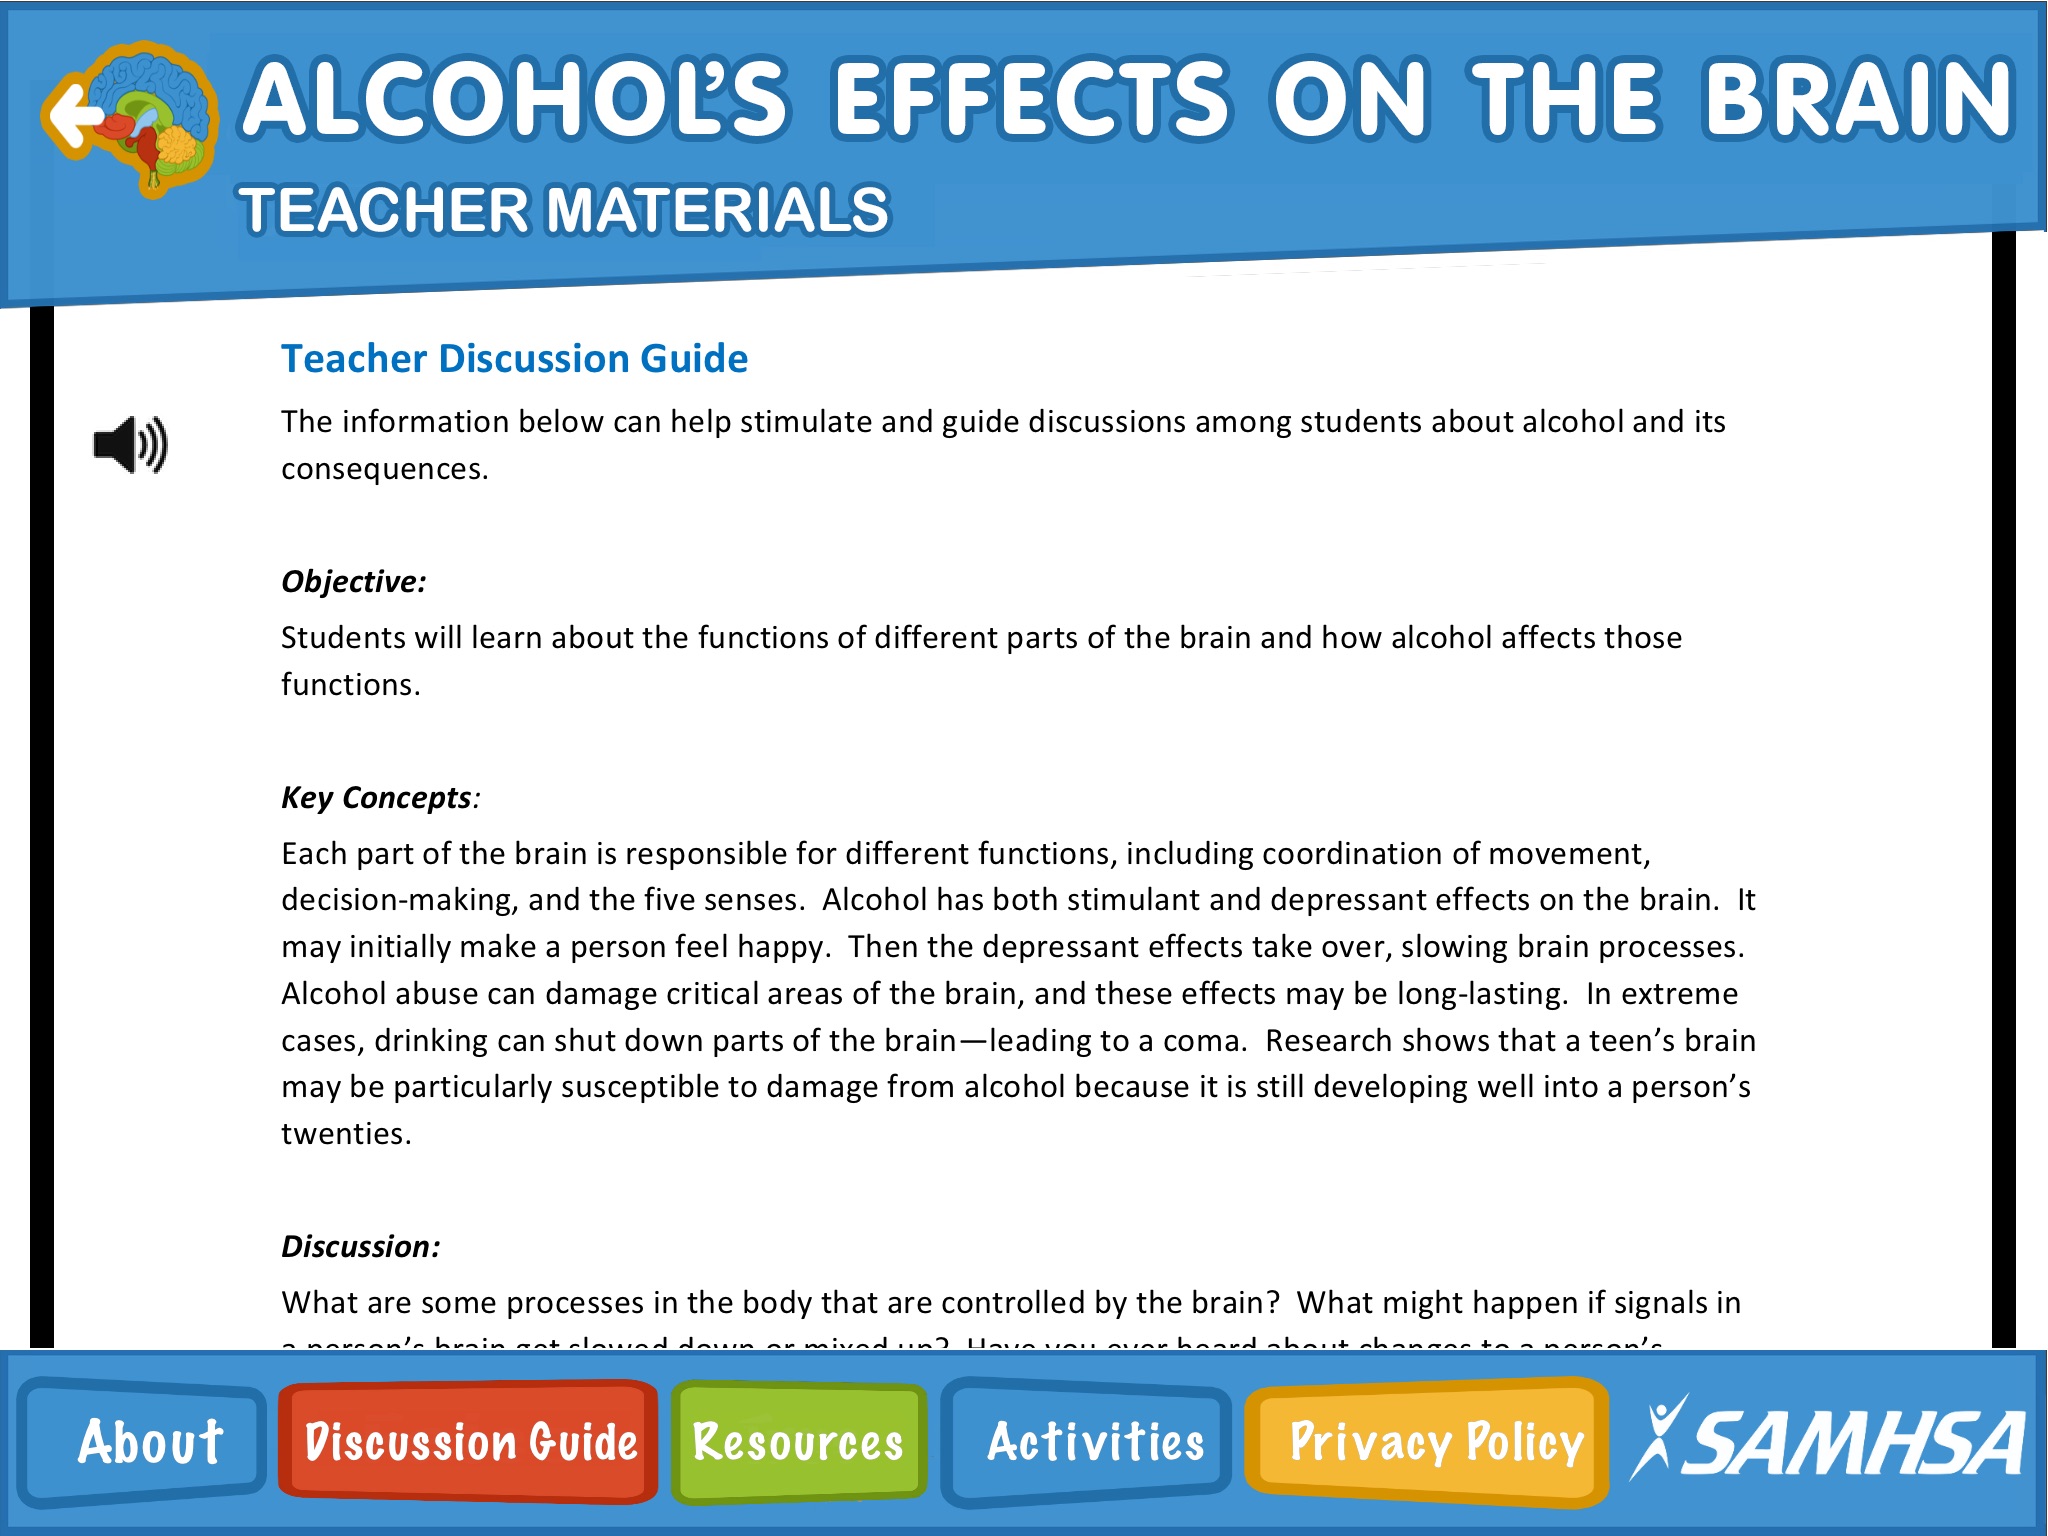 Alcohol's Effects on the Brain screenshot 4